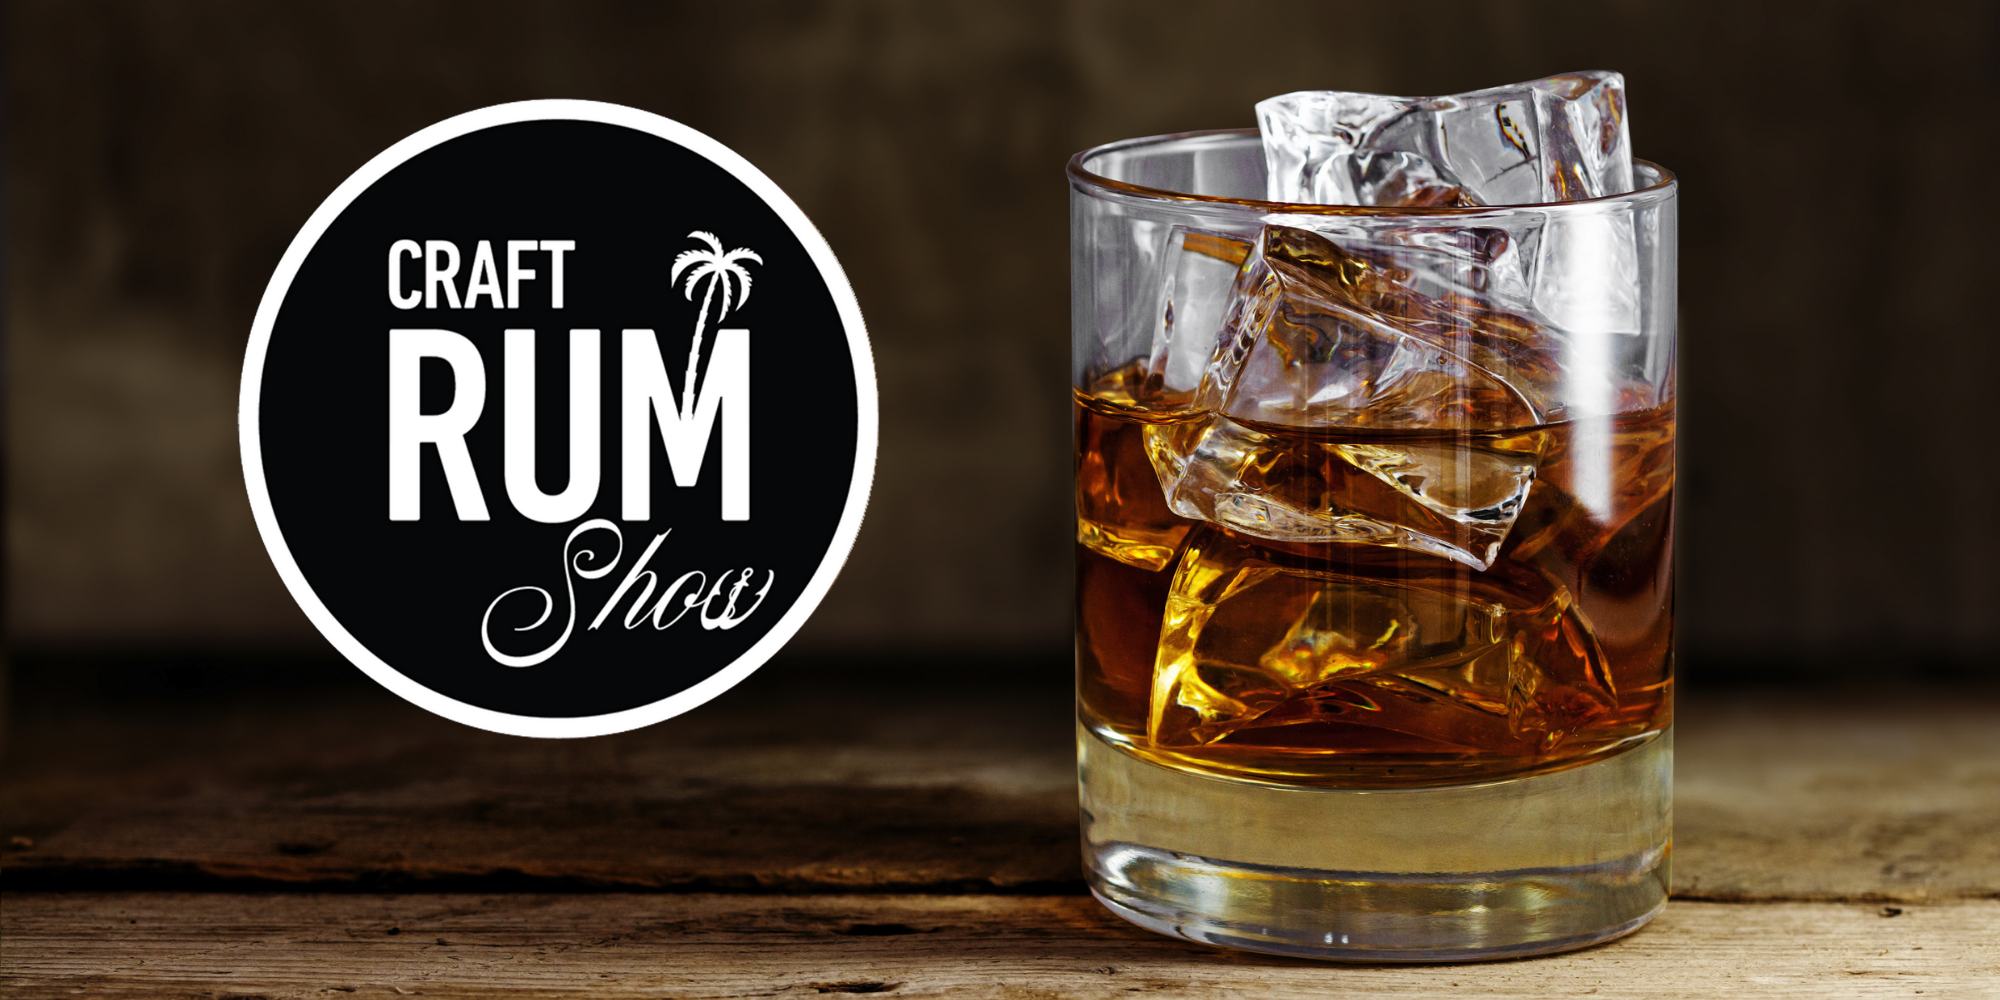 The Craft Rum Show - Cardiff